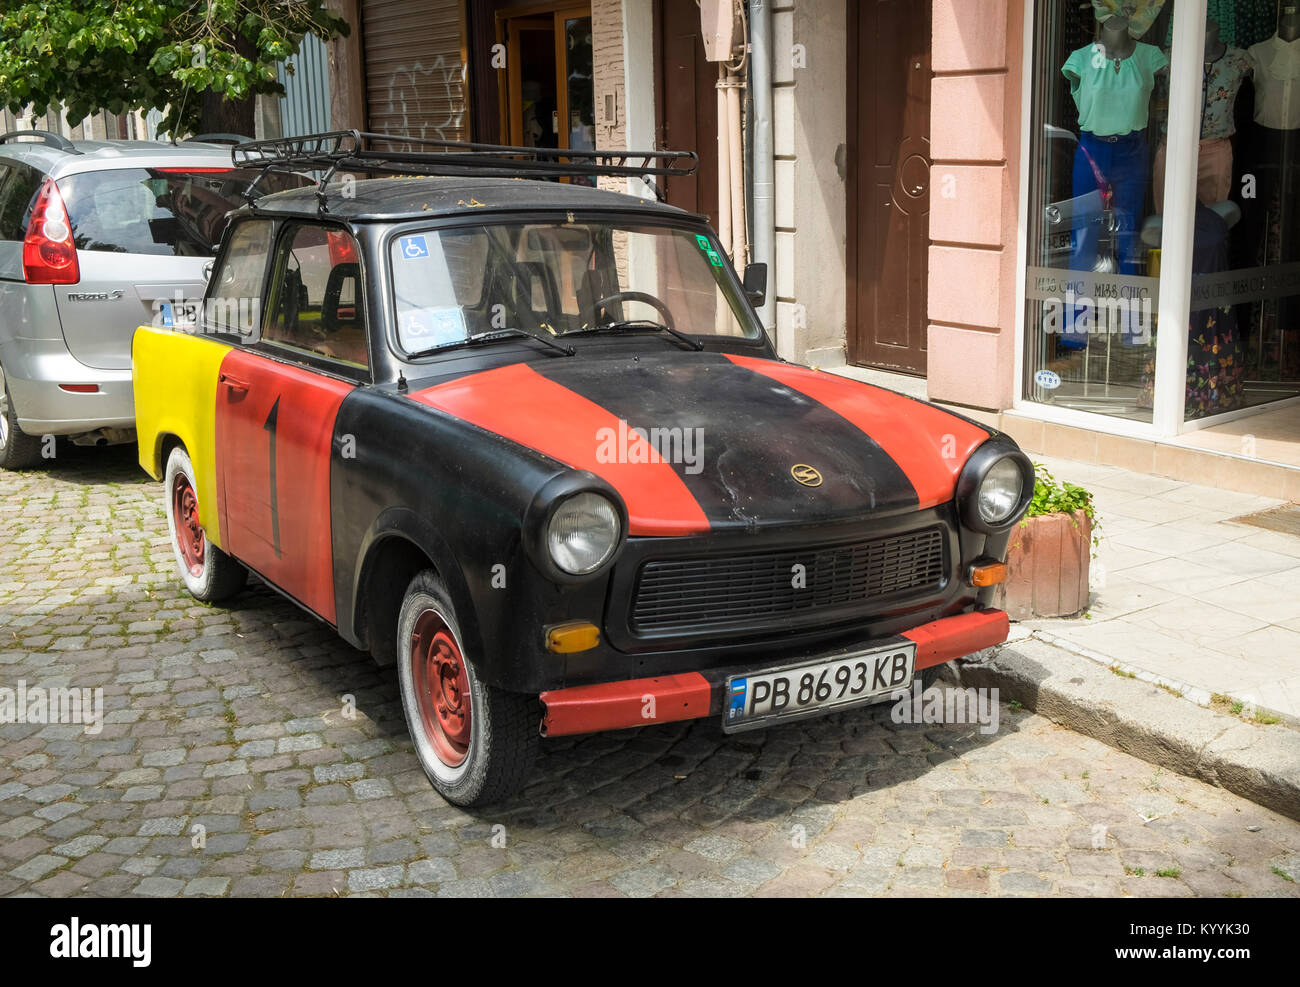 A Trabant car parked in the Kapana district of Plovdiv, Bulgaria, Europe Stock Photo